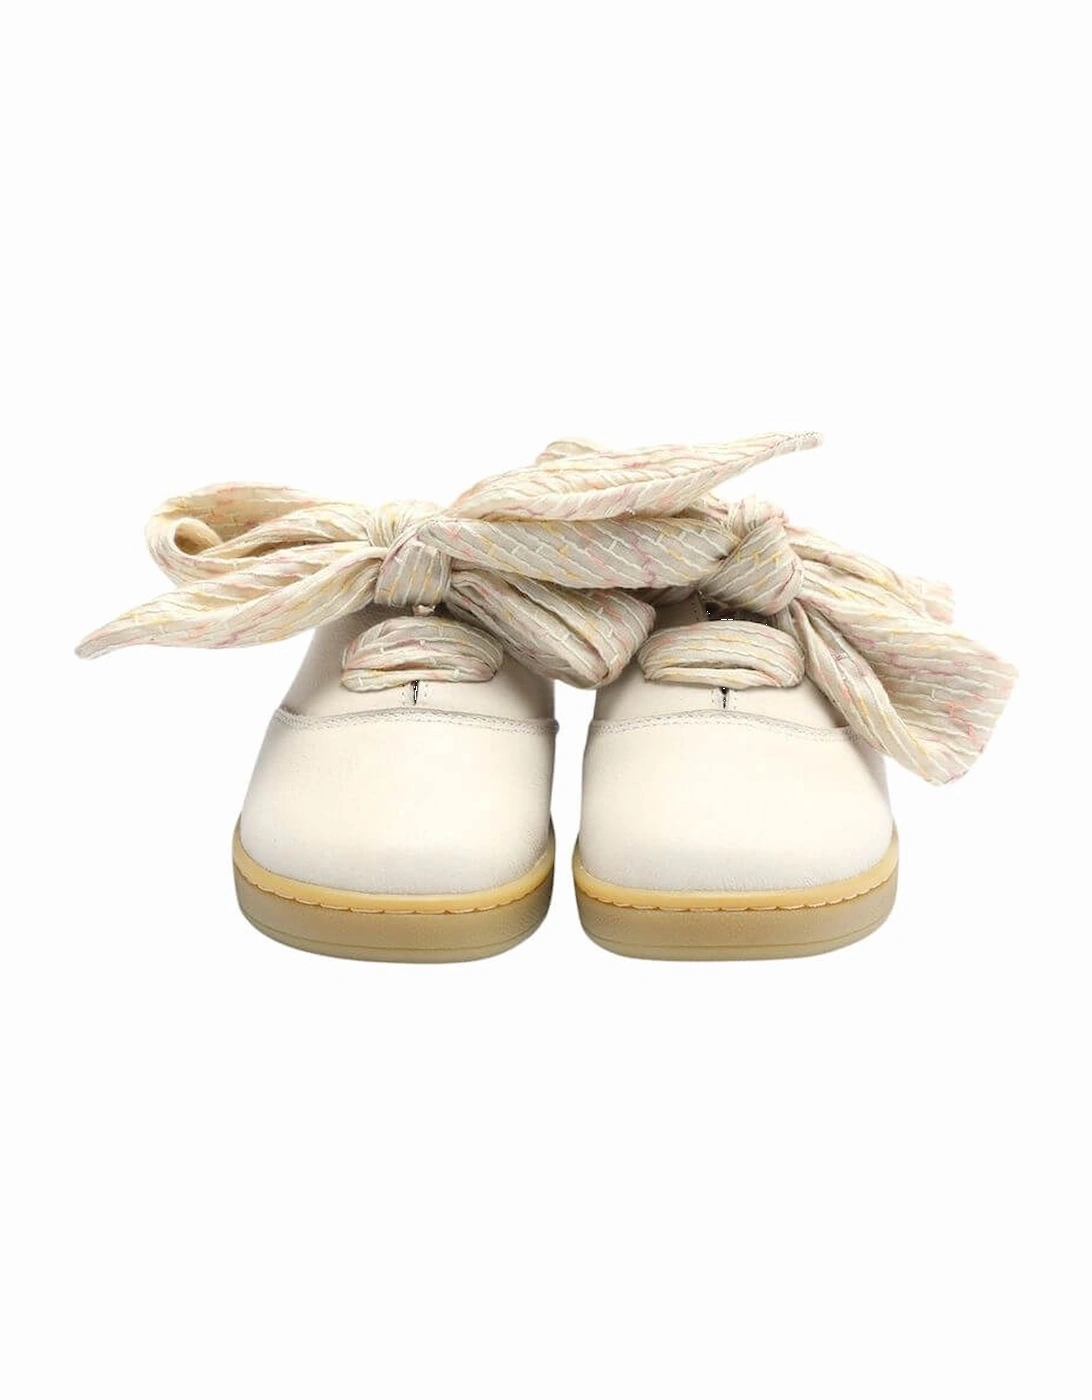 Girls Meilly Cream Leather Shoes